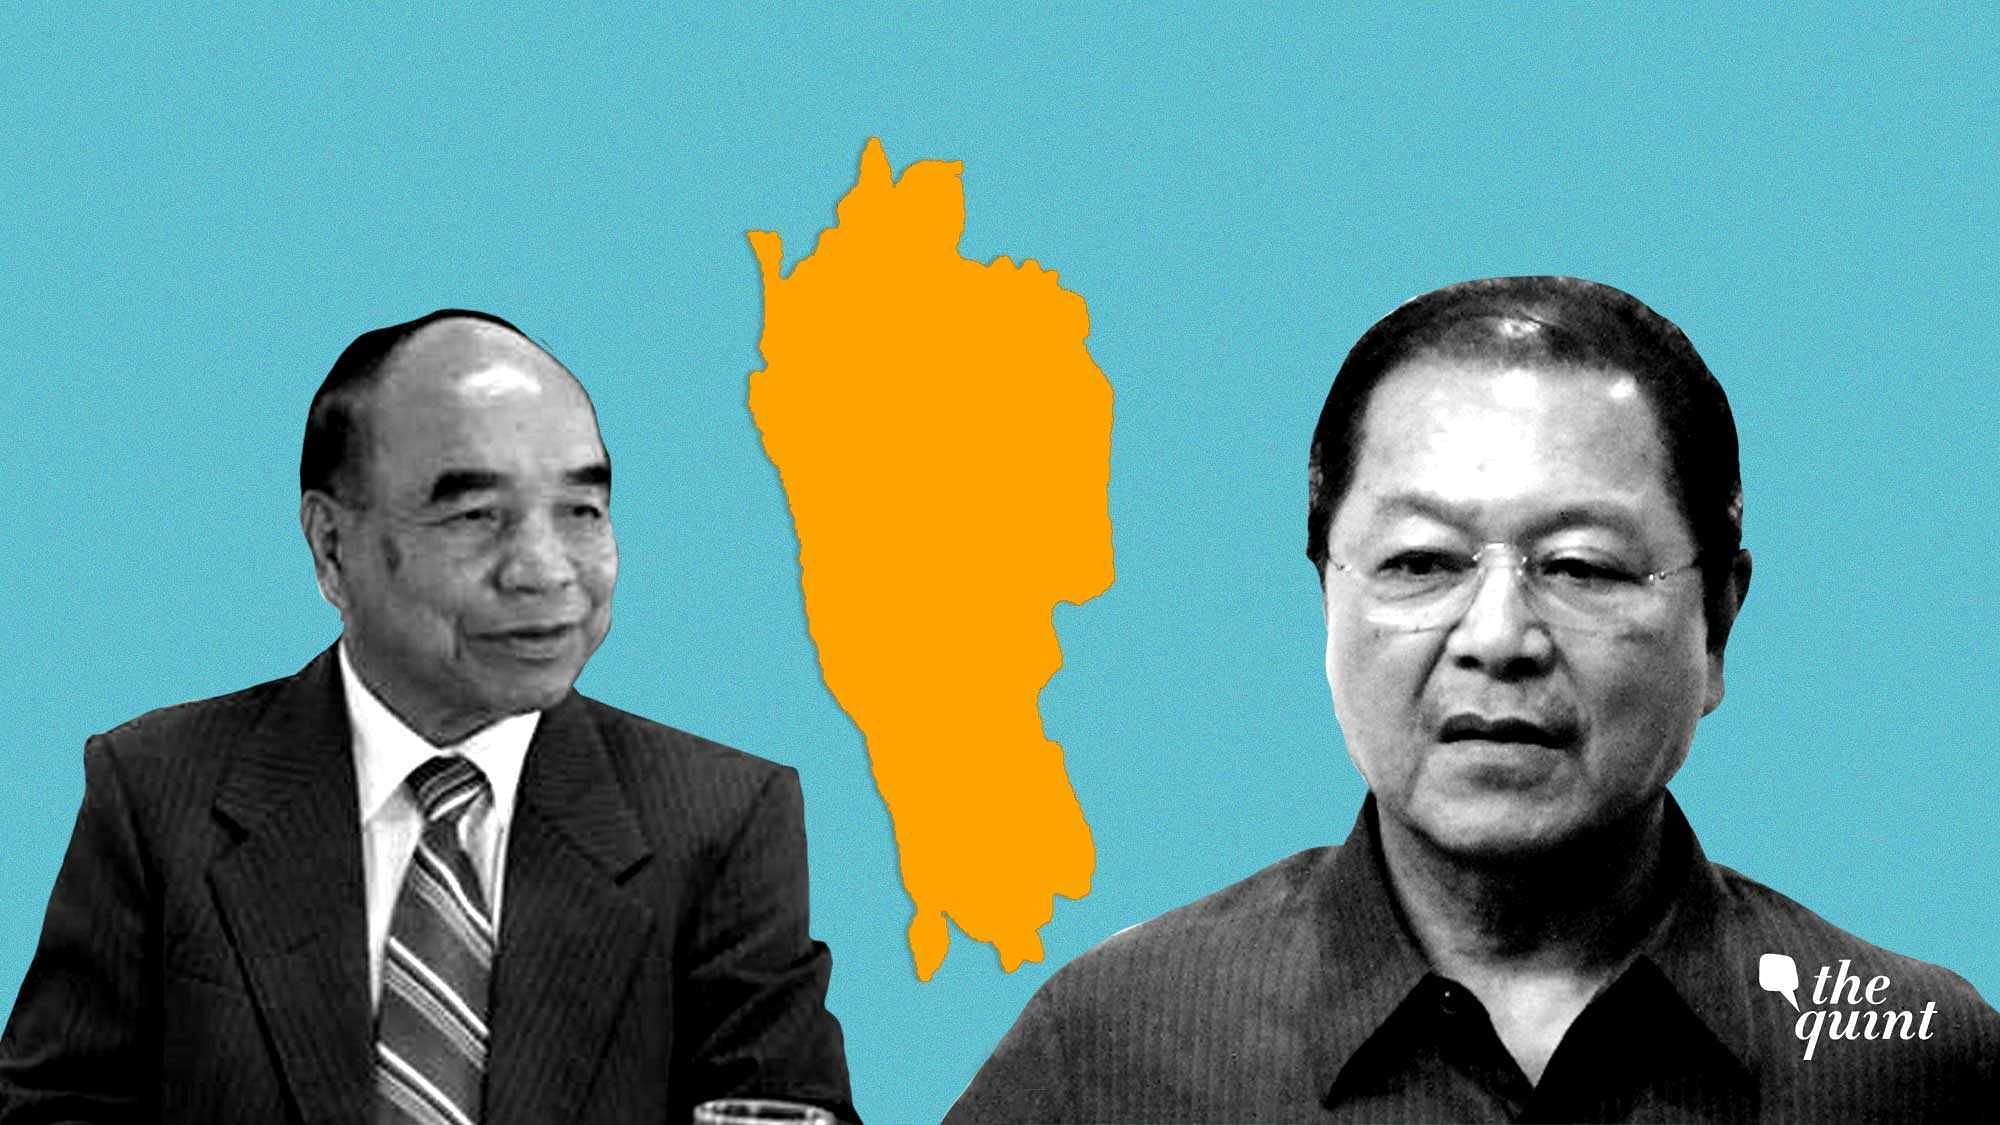 The fight for the Mizoram 2018 state assembly elections will predominantly be between the Lal Thanhawla-led Congress and the Mizo National Front (MNF) under its leader, Zoramthanga.